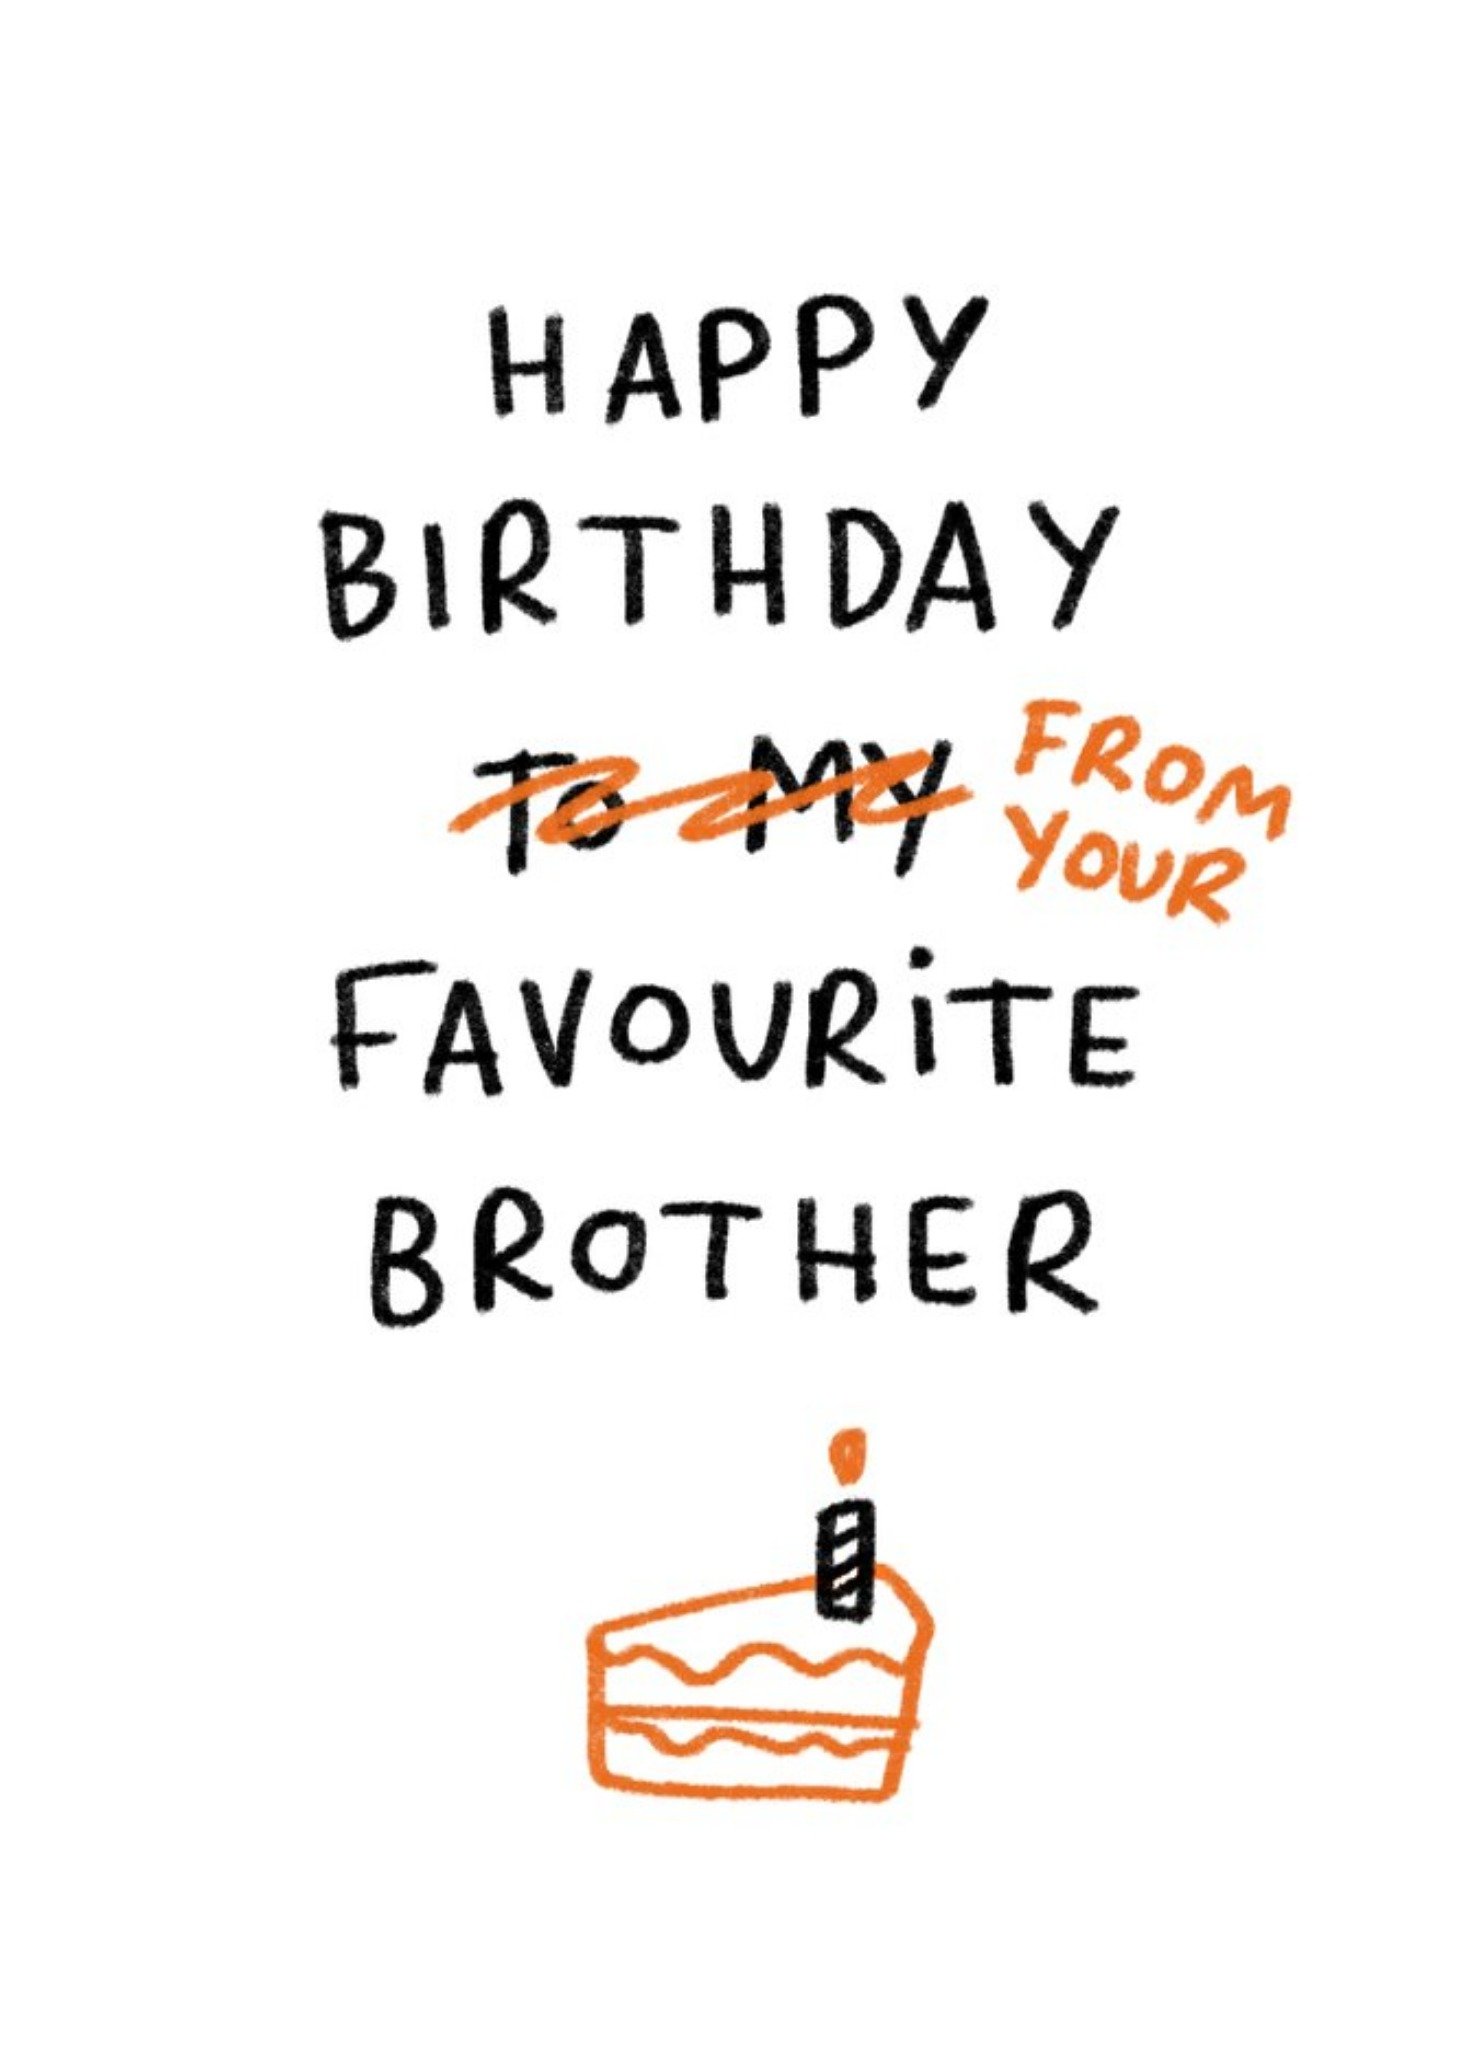 Moonpig Happy Birthday From Your Favourite Brother Funny Card, Large